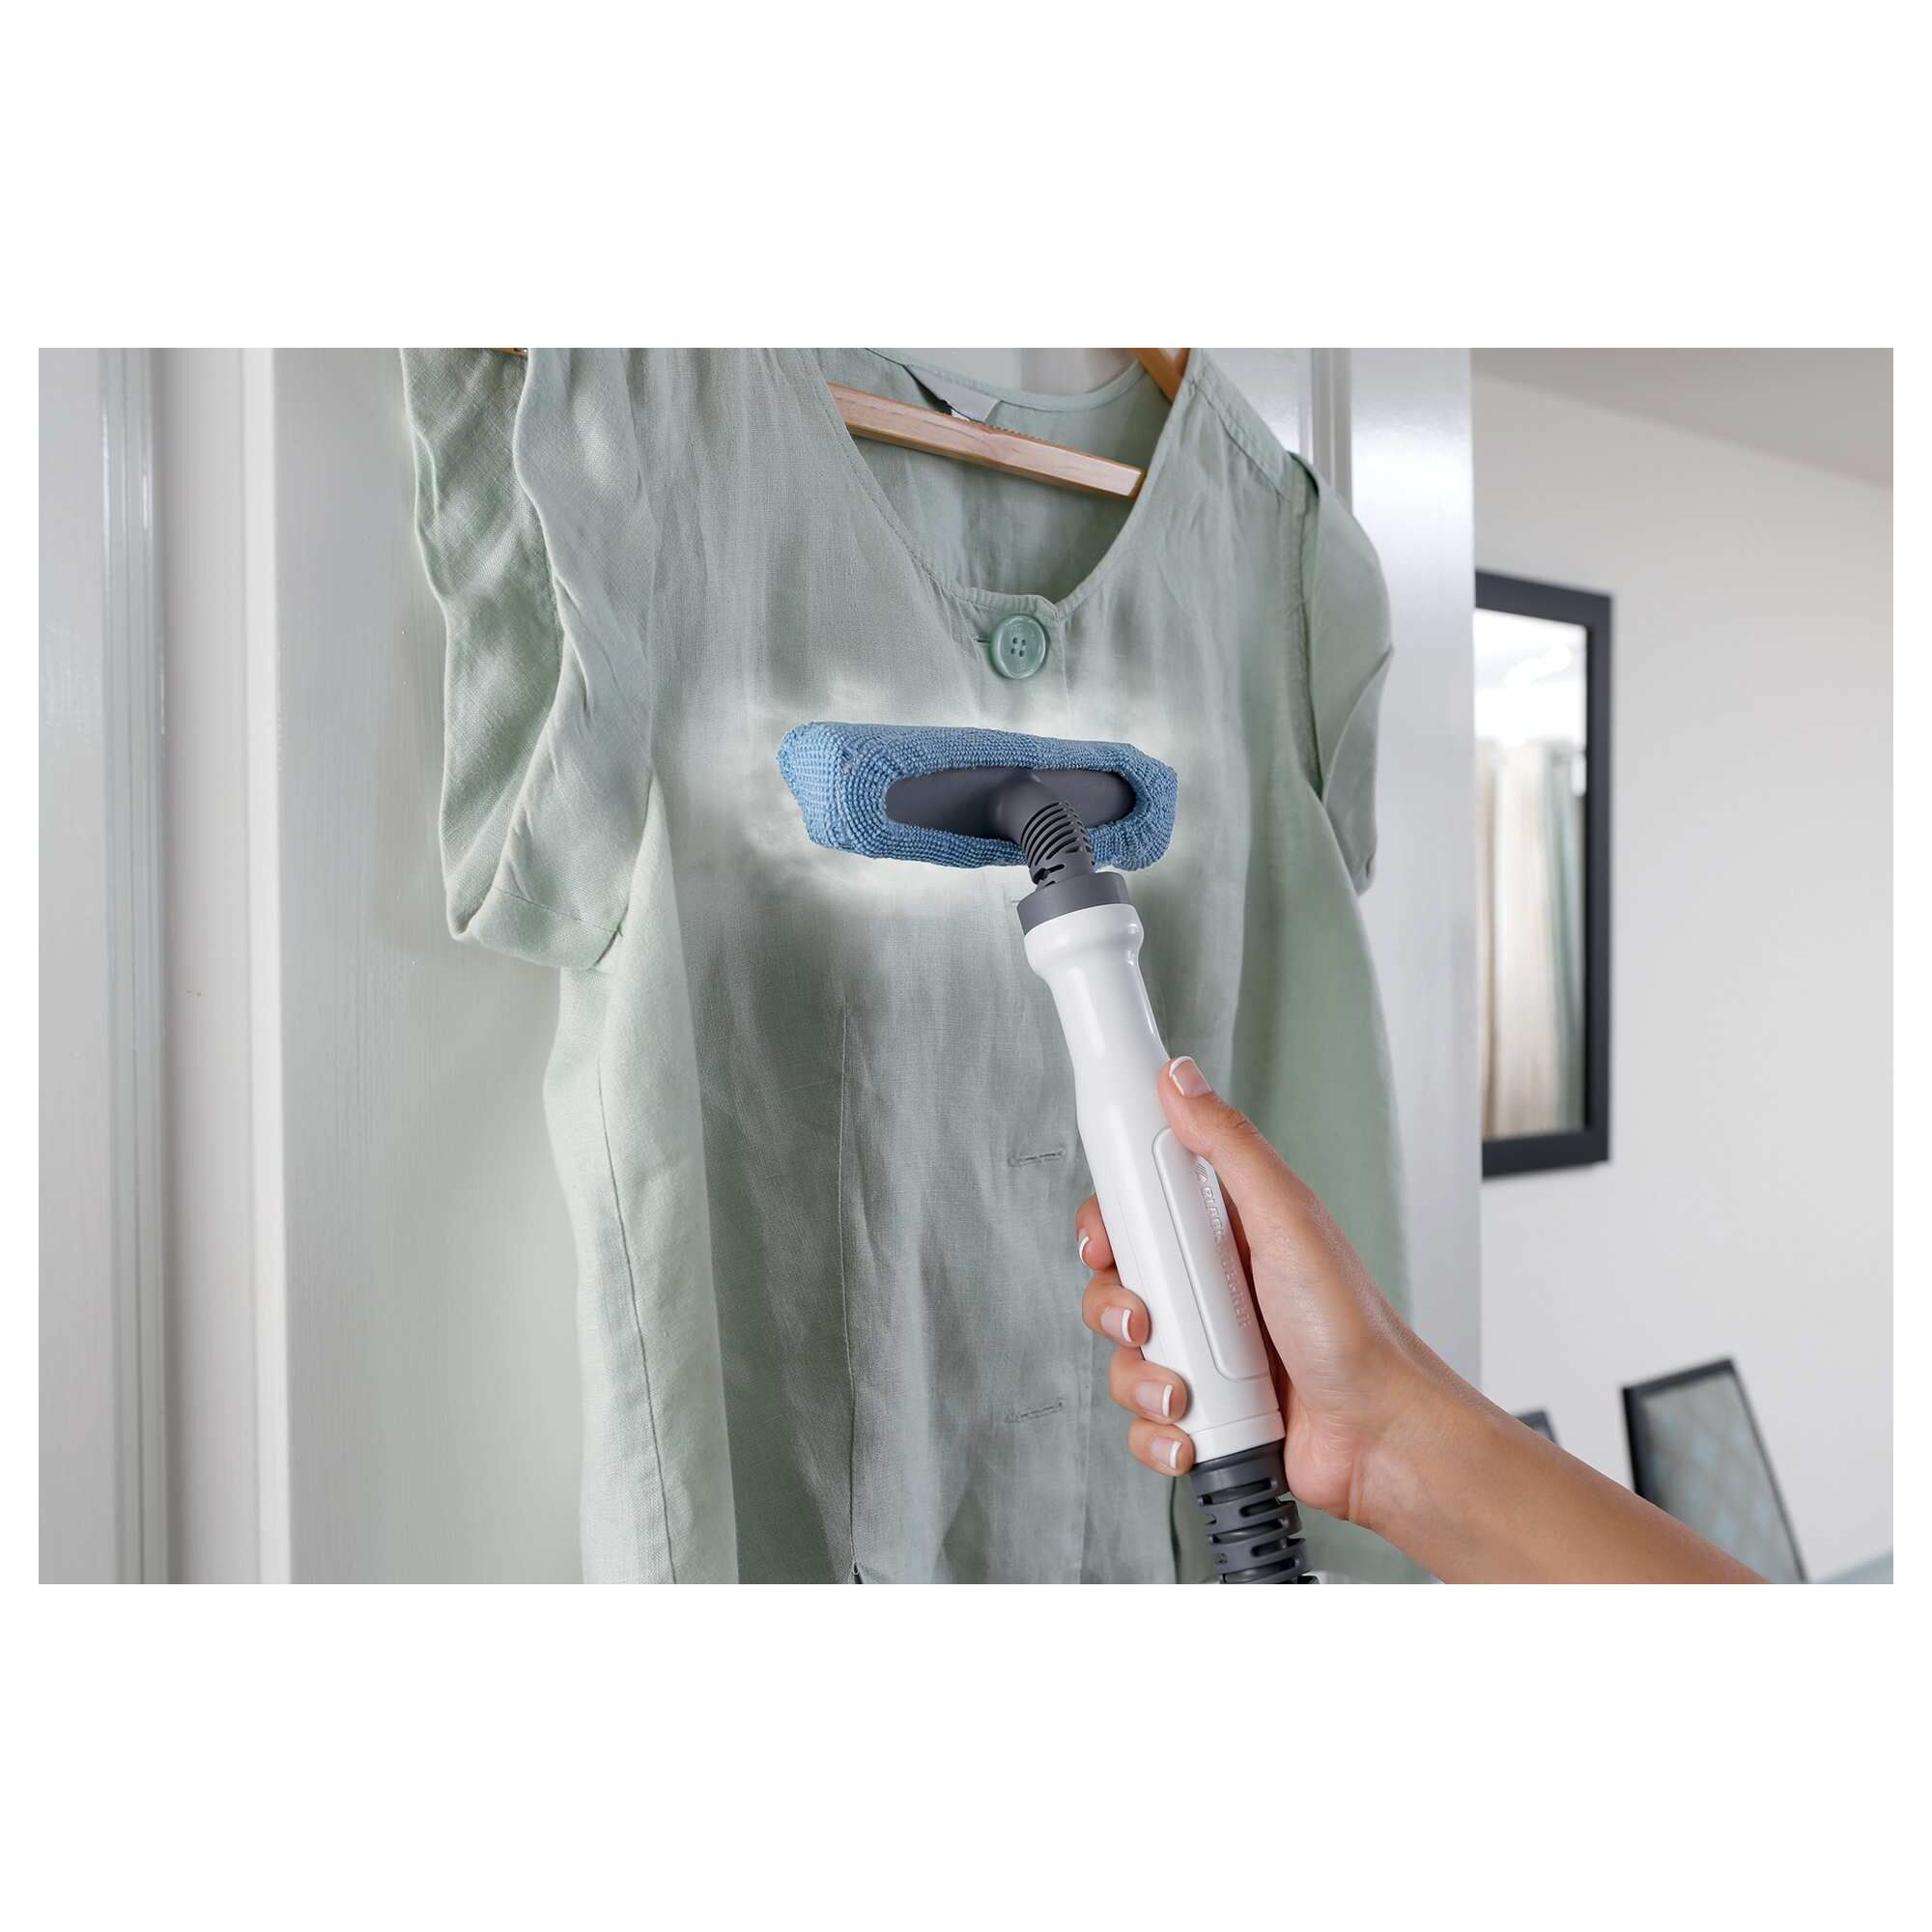 Dustbuster advanced clean cordless hand vacuum being used to clean the crease of a couch.